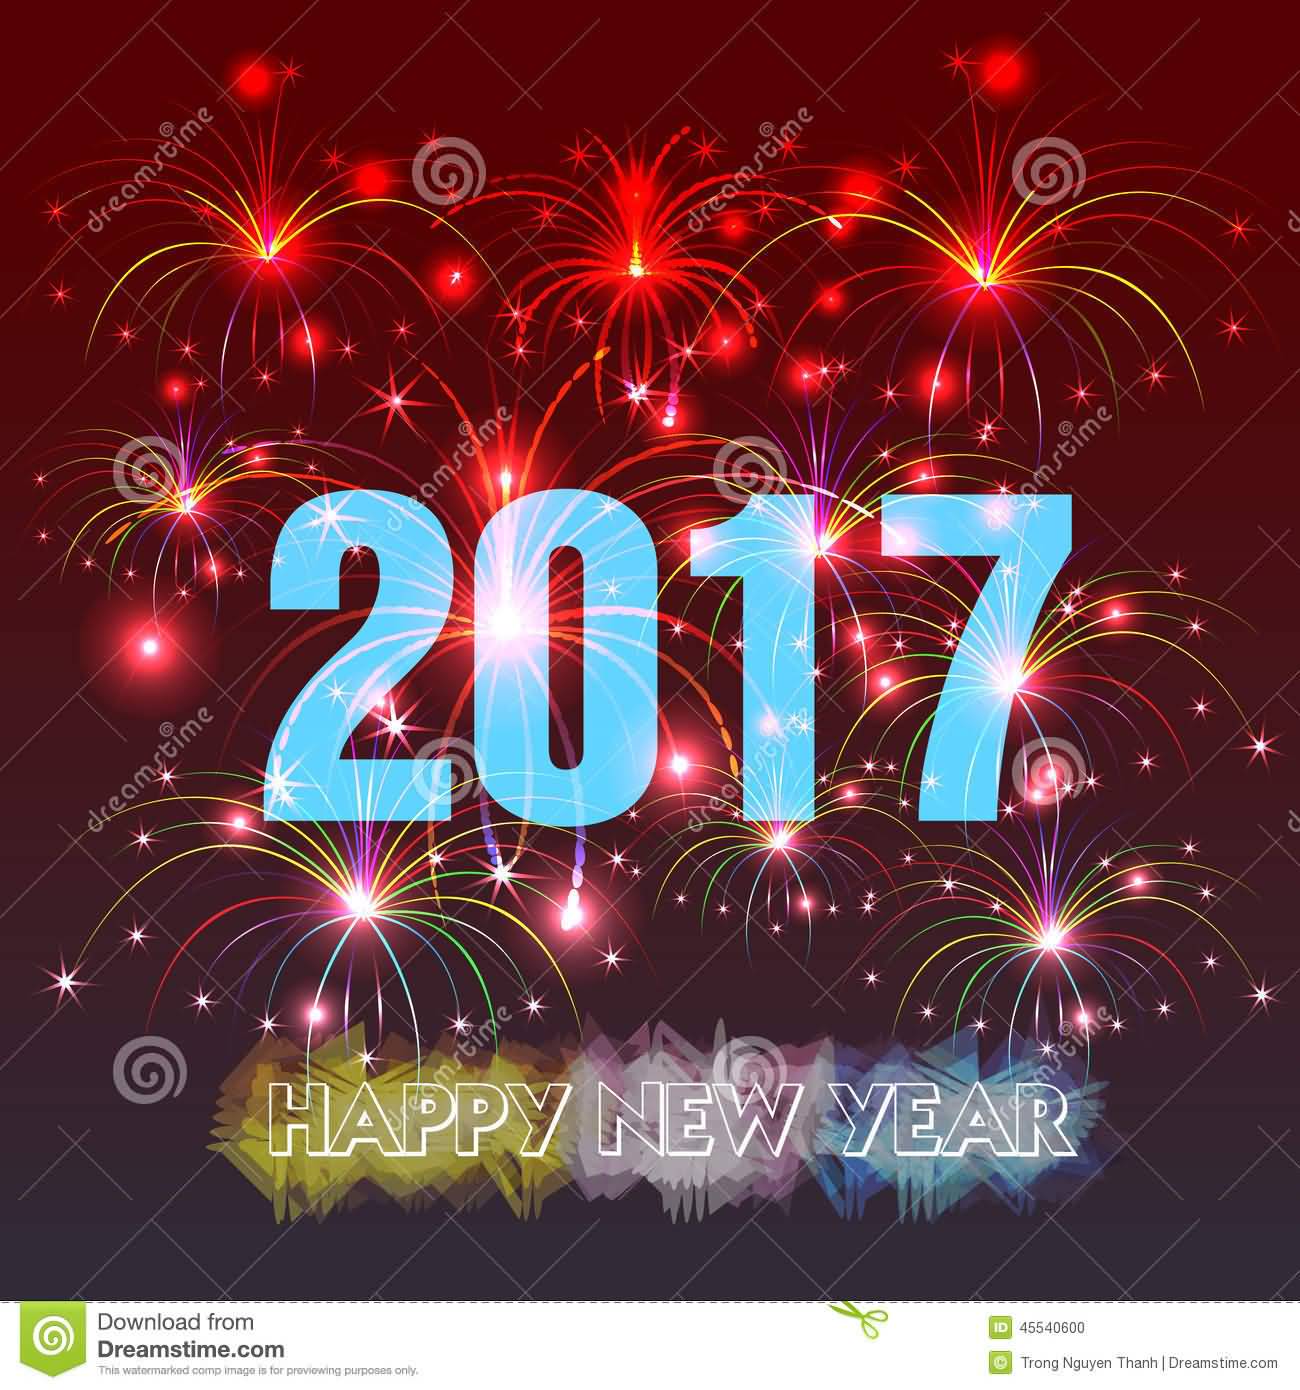 Happy New Year 2017 With Fireworks Background